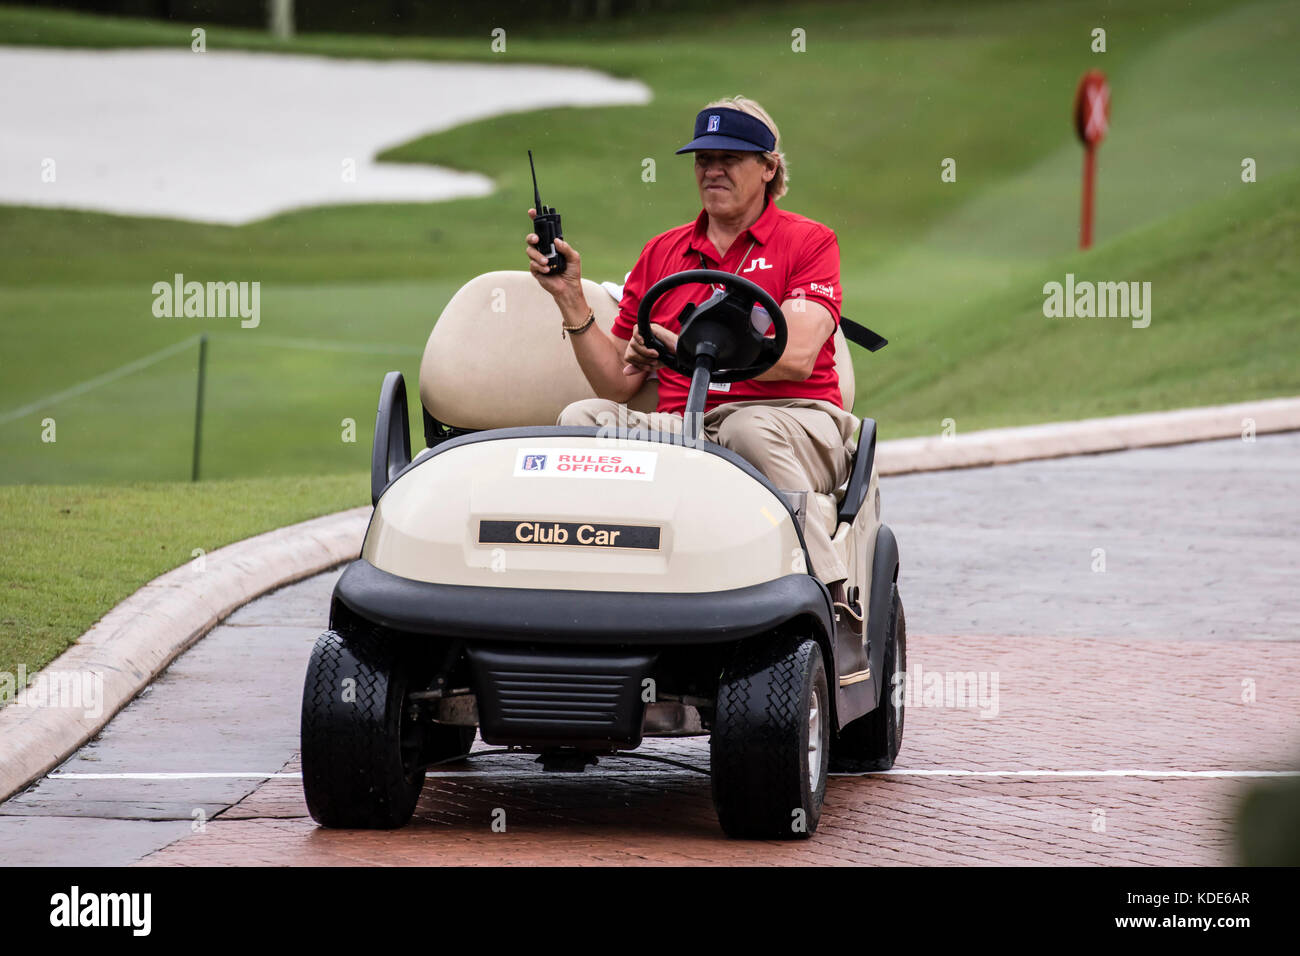 Kuala Lumpur, Malaysia. 13th October, 2017. PGA official waiting for instruction to suspend play as rain and thunder over shadow Round Two play at PGA CIMB Classic 2017 golf tournament in Kuala Lumpur, Malaysia. © Danny Chan/Alamy Live News. Stock Photo